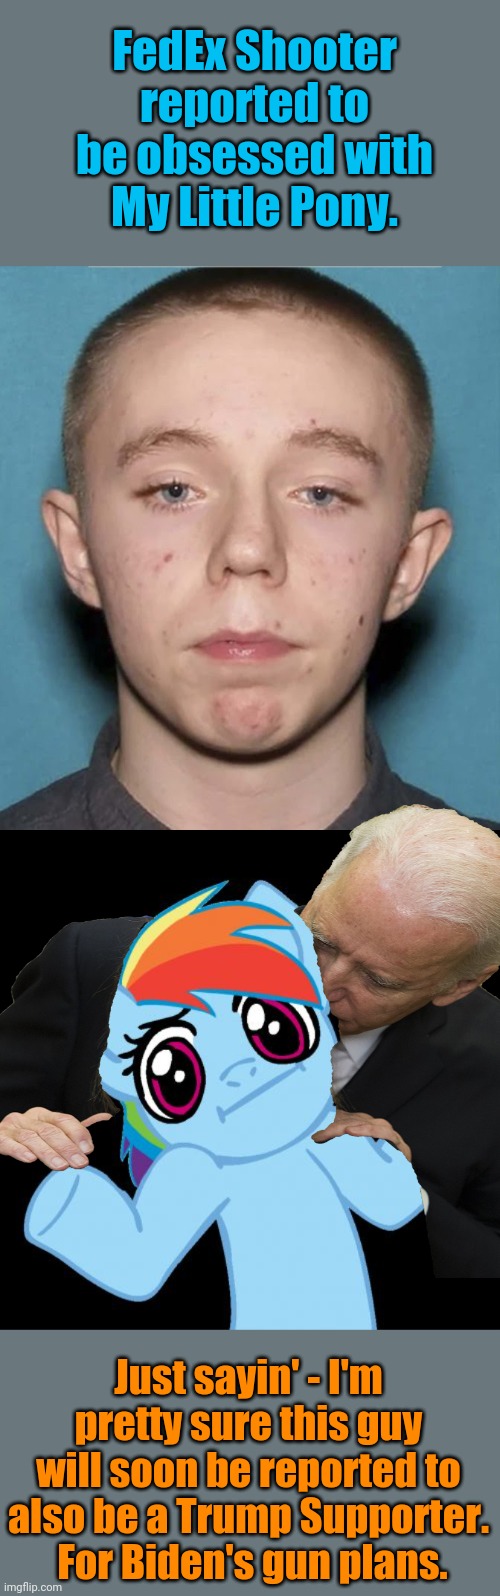 My Little Pony:  Friendship is Tragic | FedEx Shooter reported to be obsessed with My Little Pony. Just sayin' - I'm pretty sure this guy will soon be reported to also be a Trump Supporter.  For Biden's gun plans. | image tagged in memes,pony shrugs,fedex | made w/ Imgflip meme maker